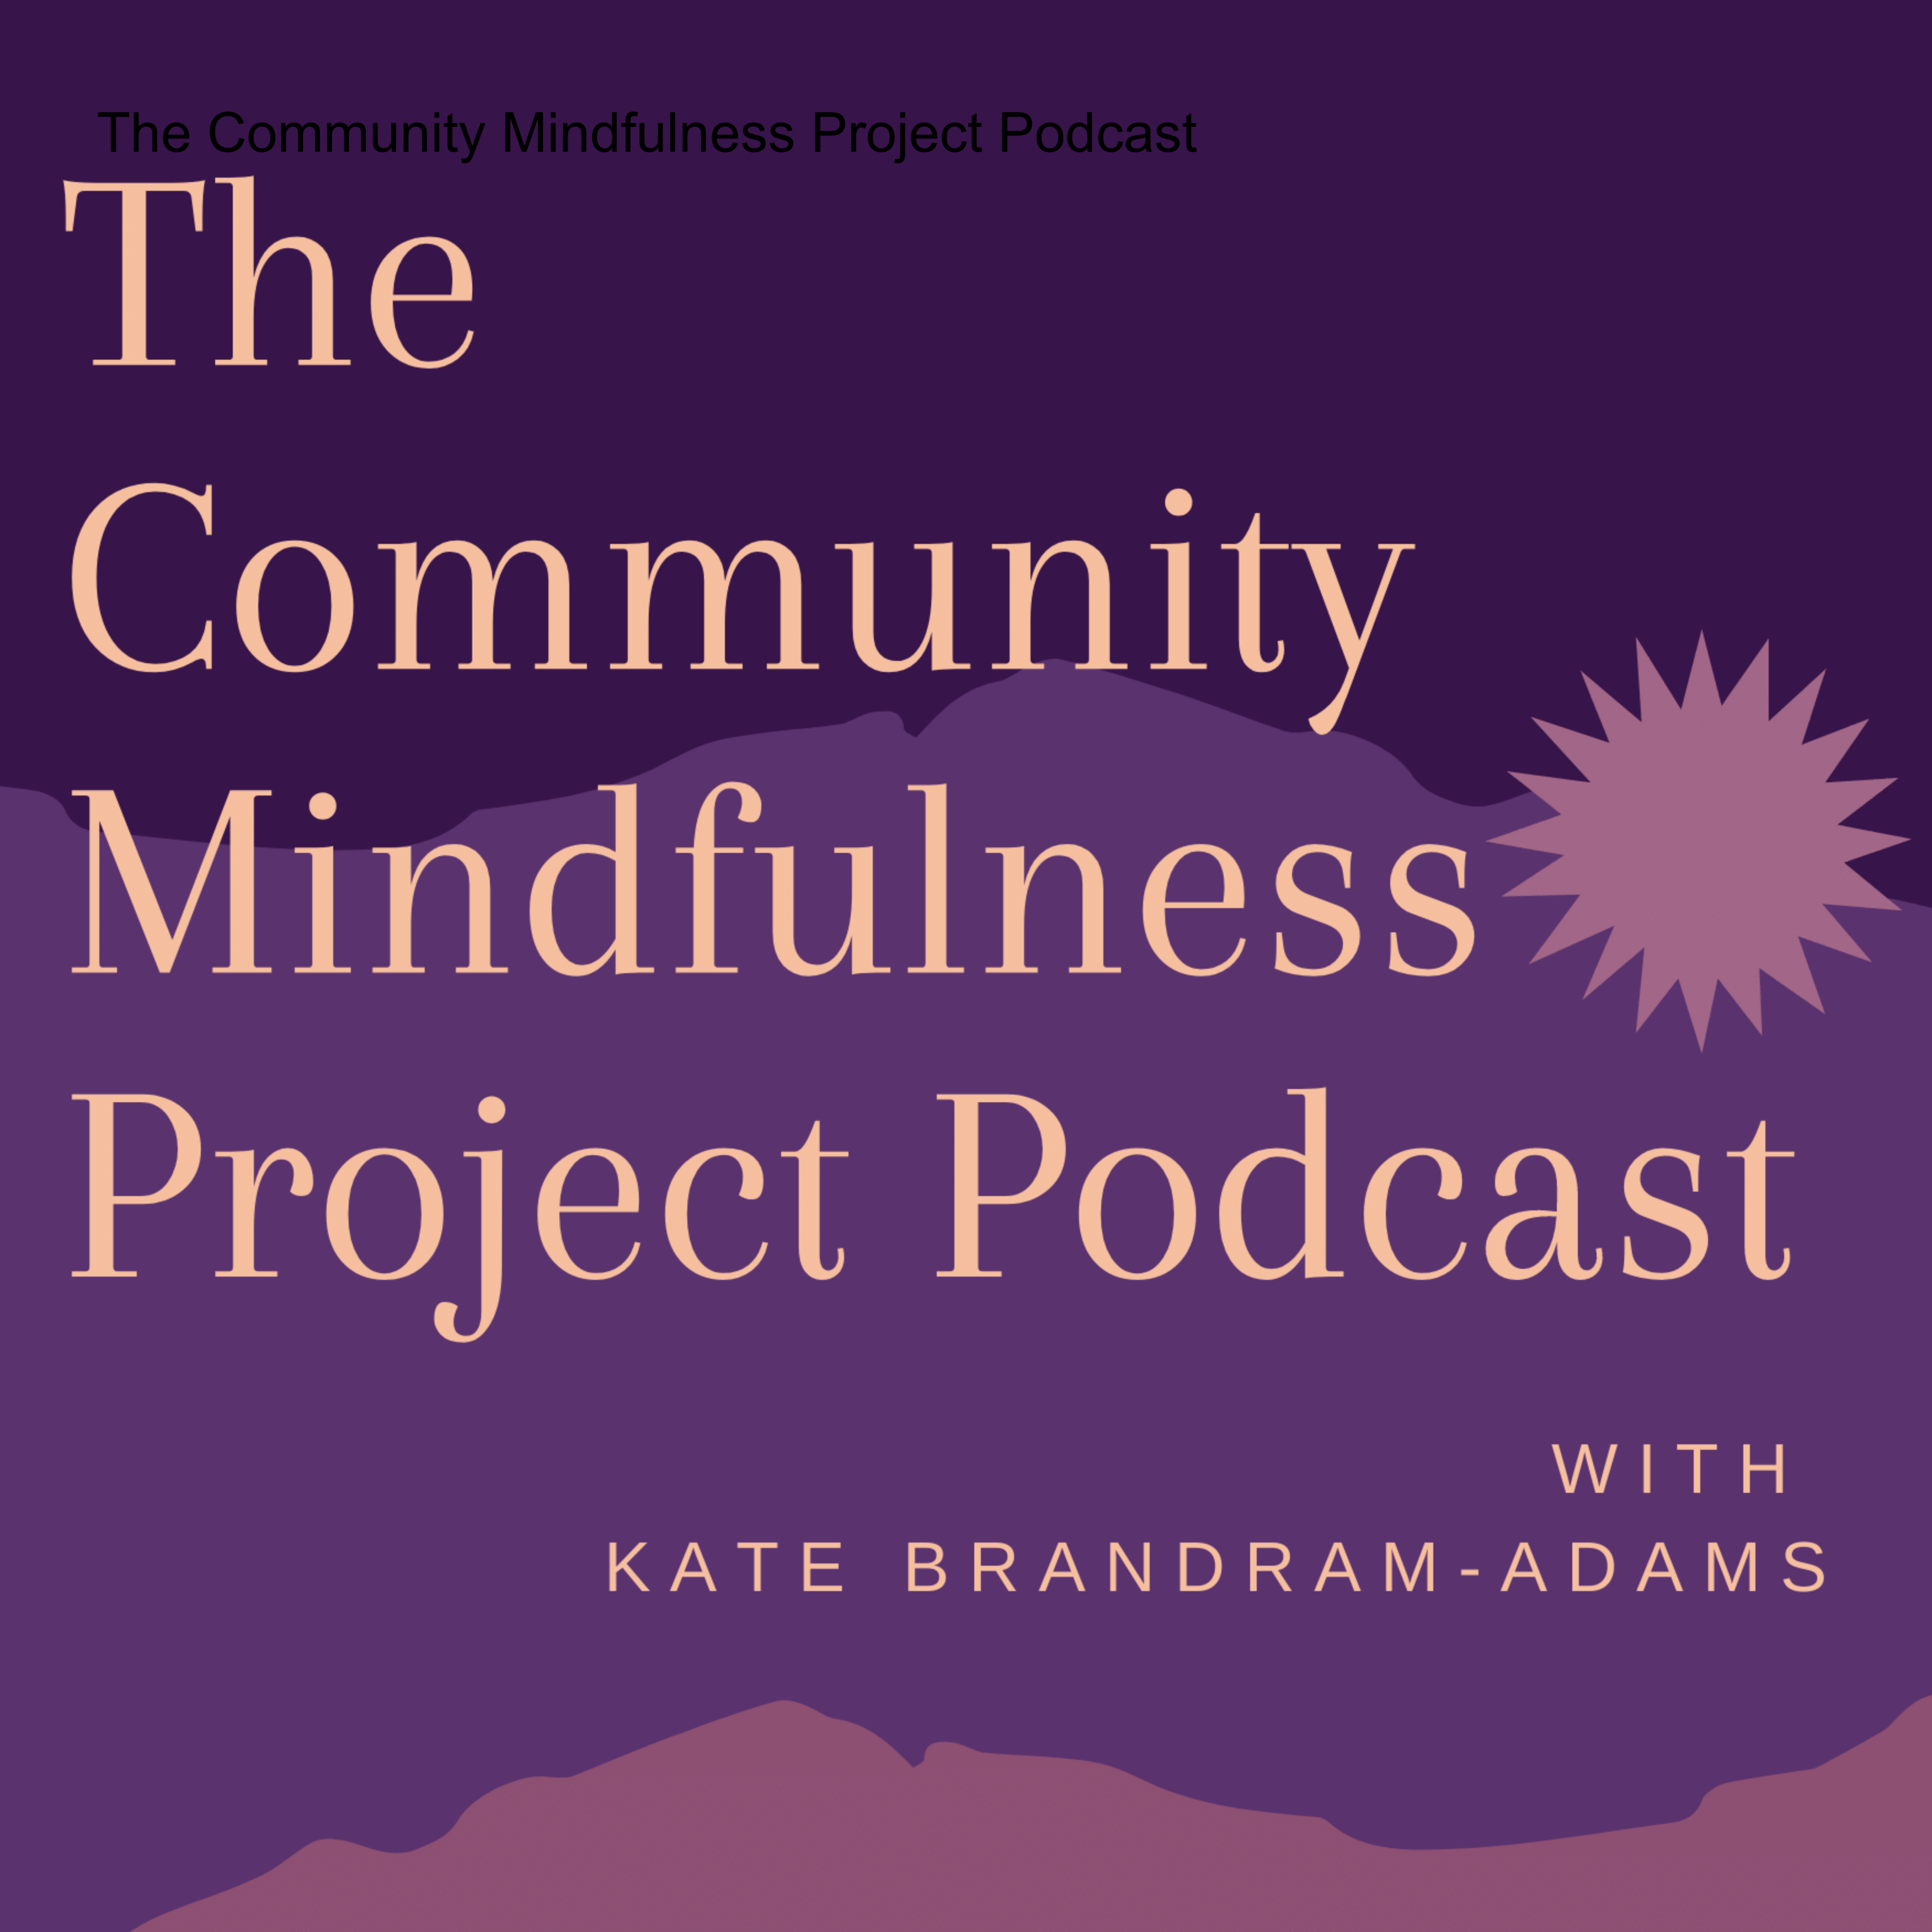 The Community Mindfulness Project Podcast